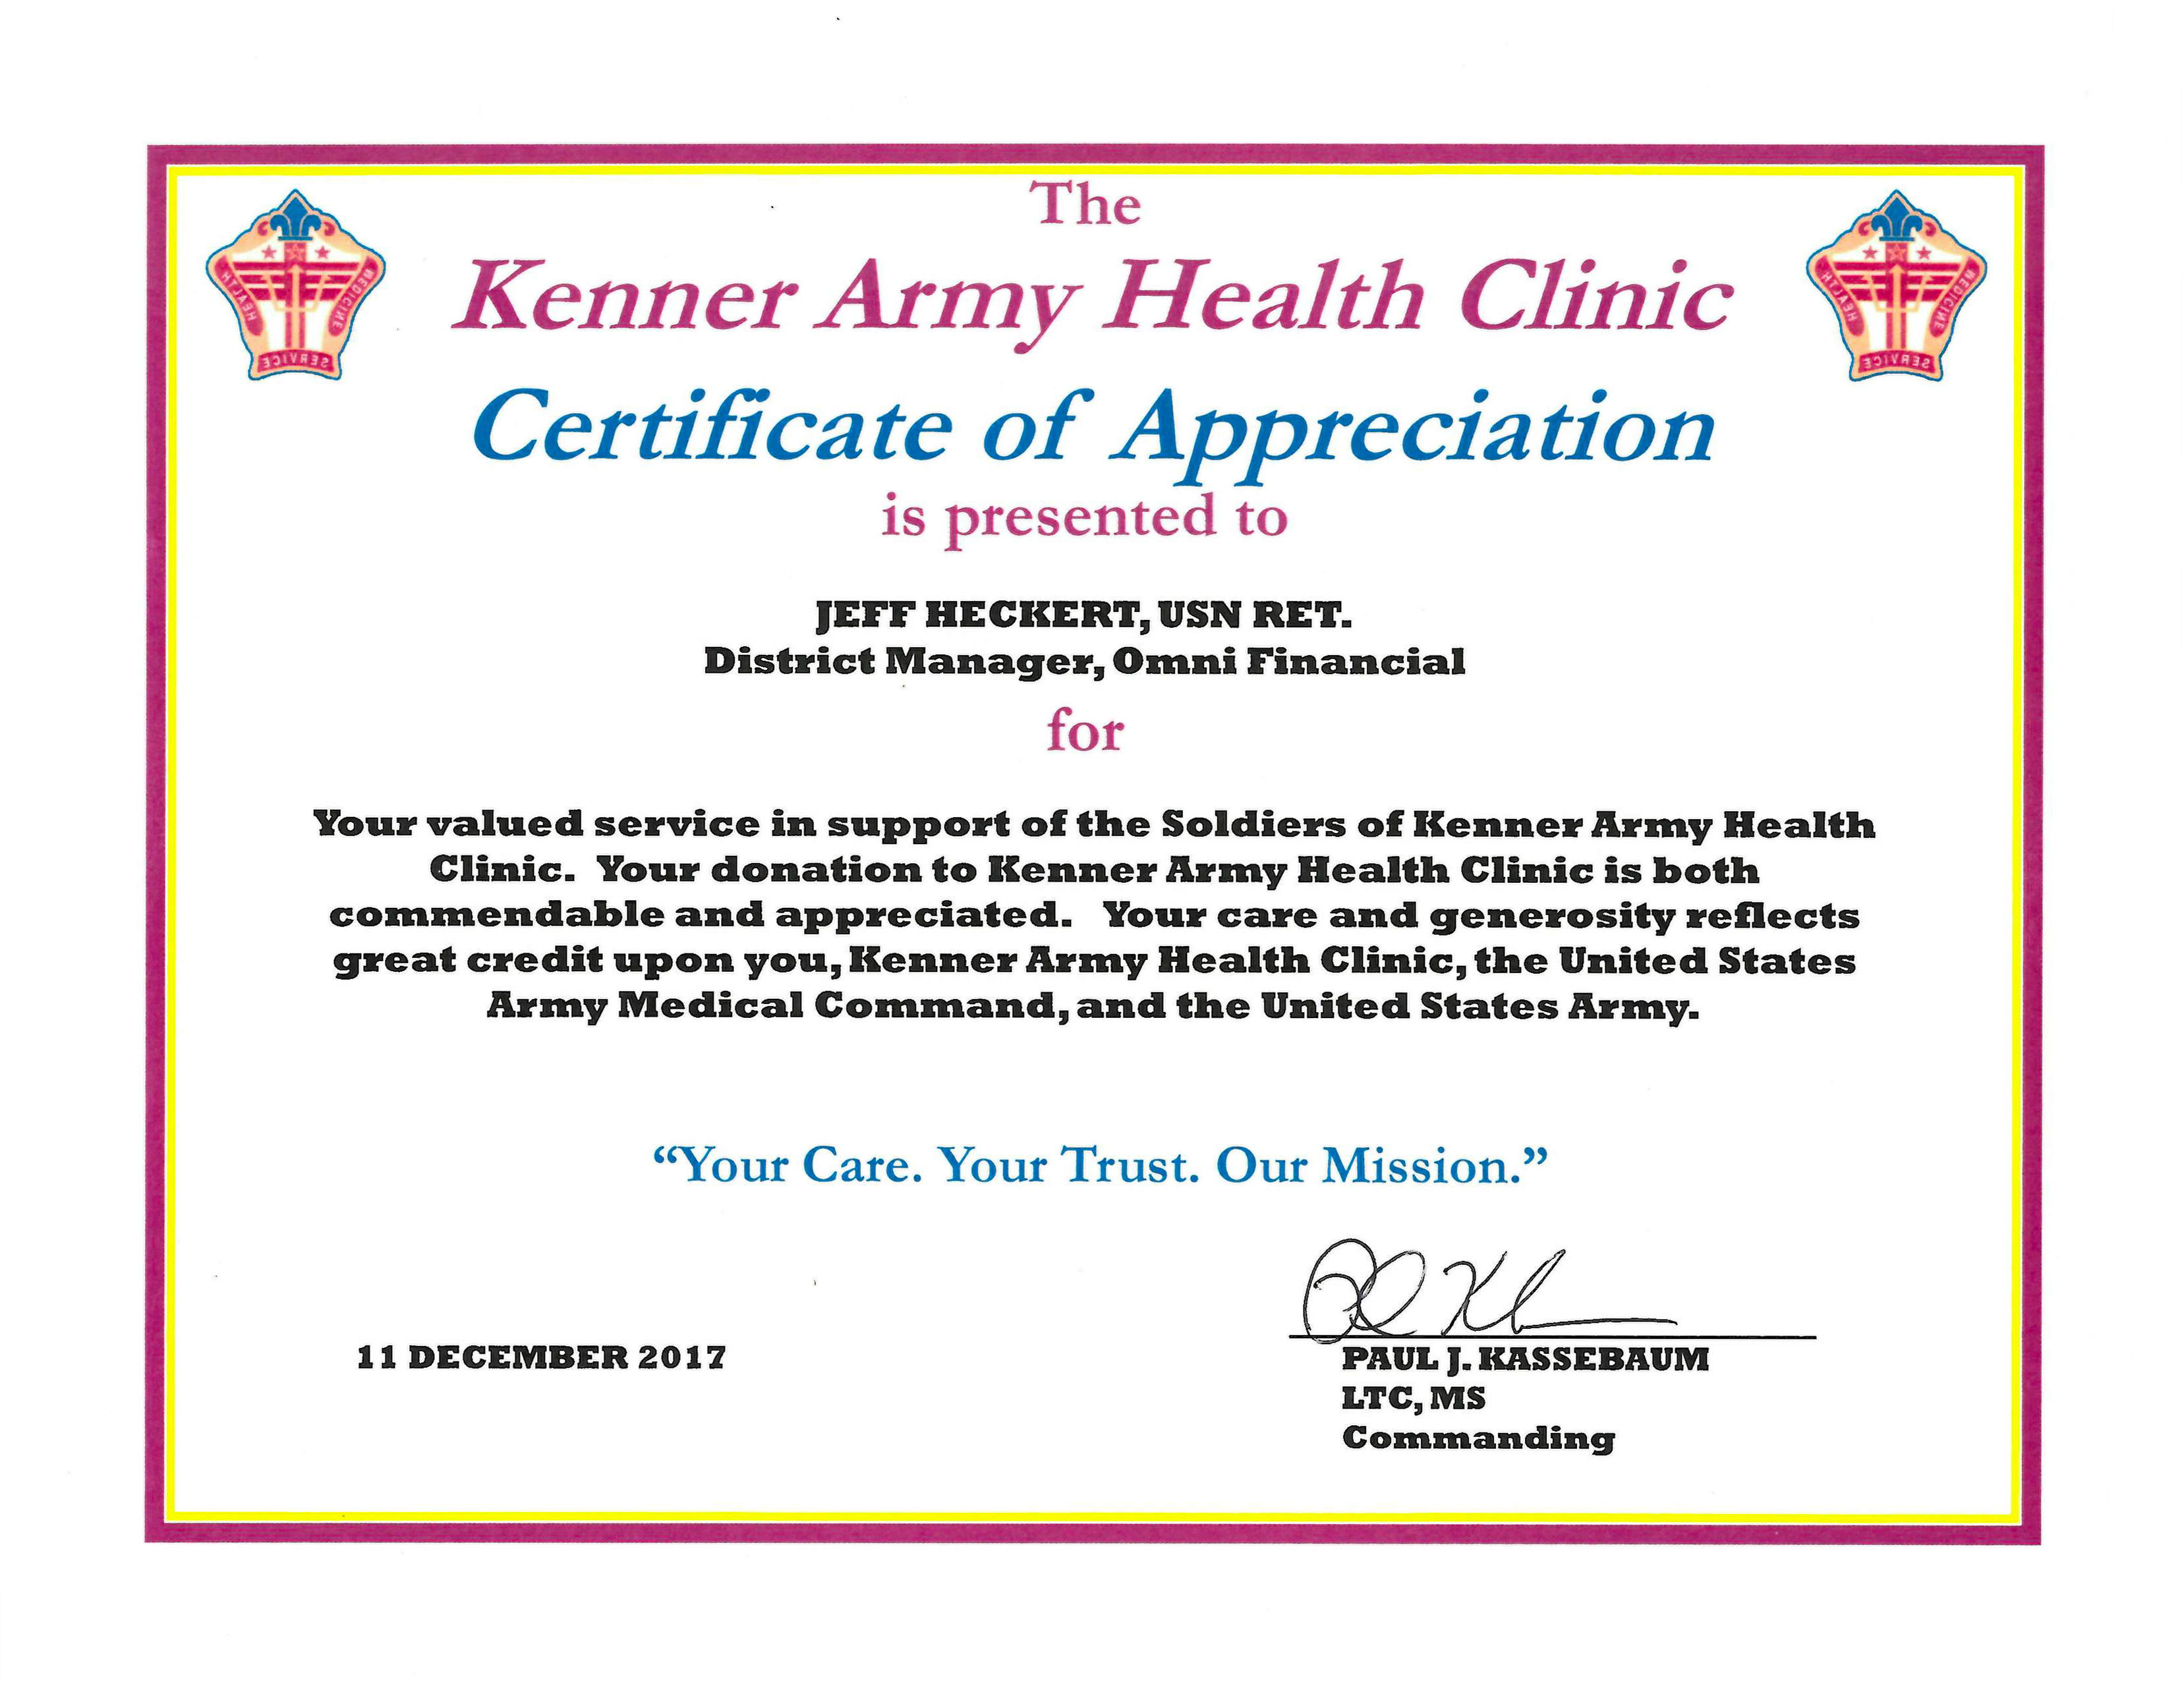 The-Kenner-Army-Health-Clinic-Certificate-of-Appreciation-December-2017.jpg